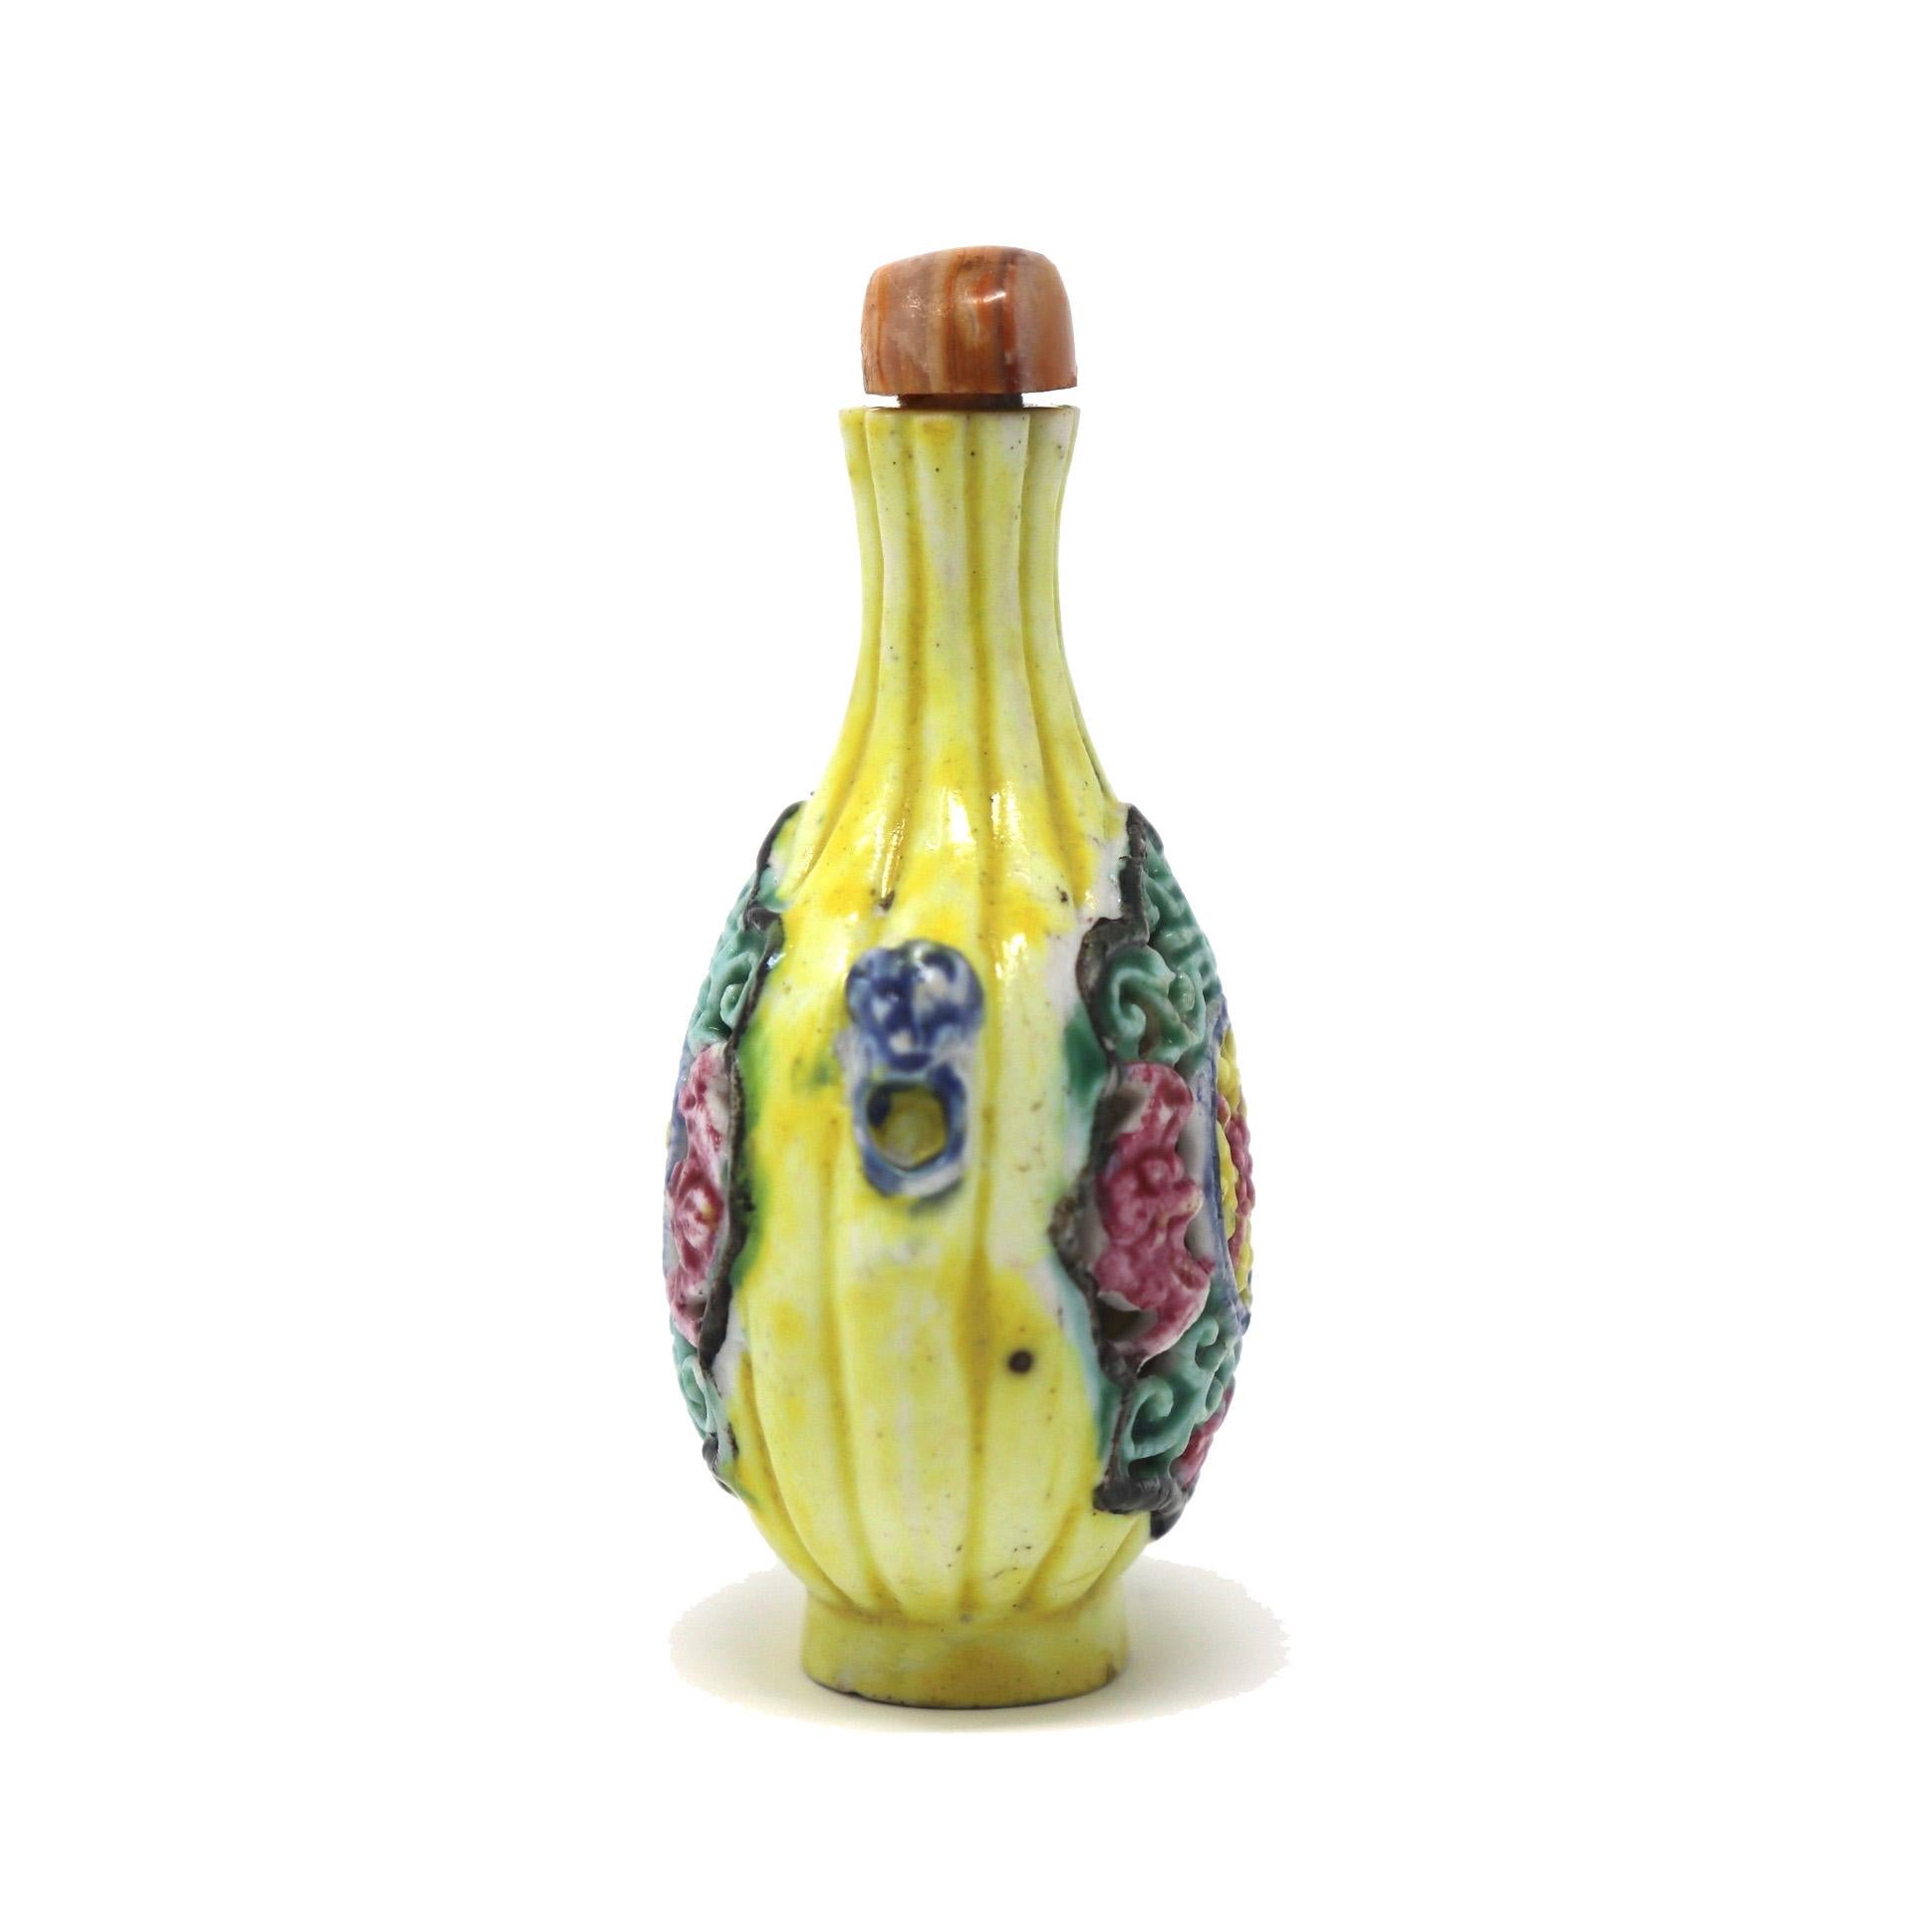 Antique Chinese reticulated soft paste porcelain snuff bottle, ribbed and rounded vase form with a long flared neck, flat mouth, narrow aperture, animal mask handles at the opposing shoulders, raised oval foot rim with a countersunk base, moulded